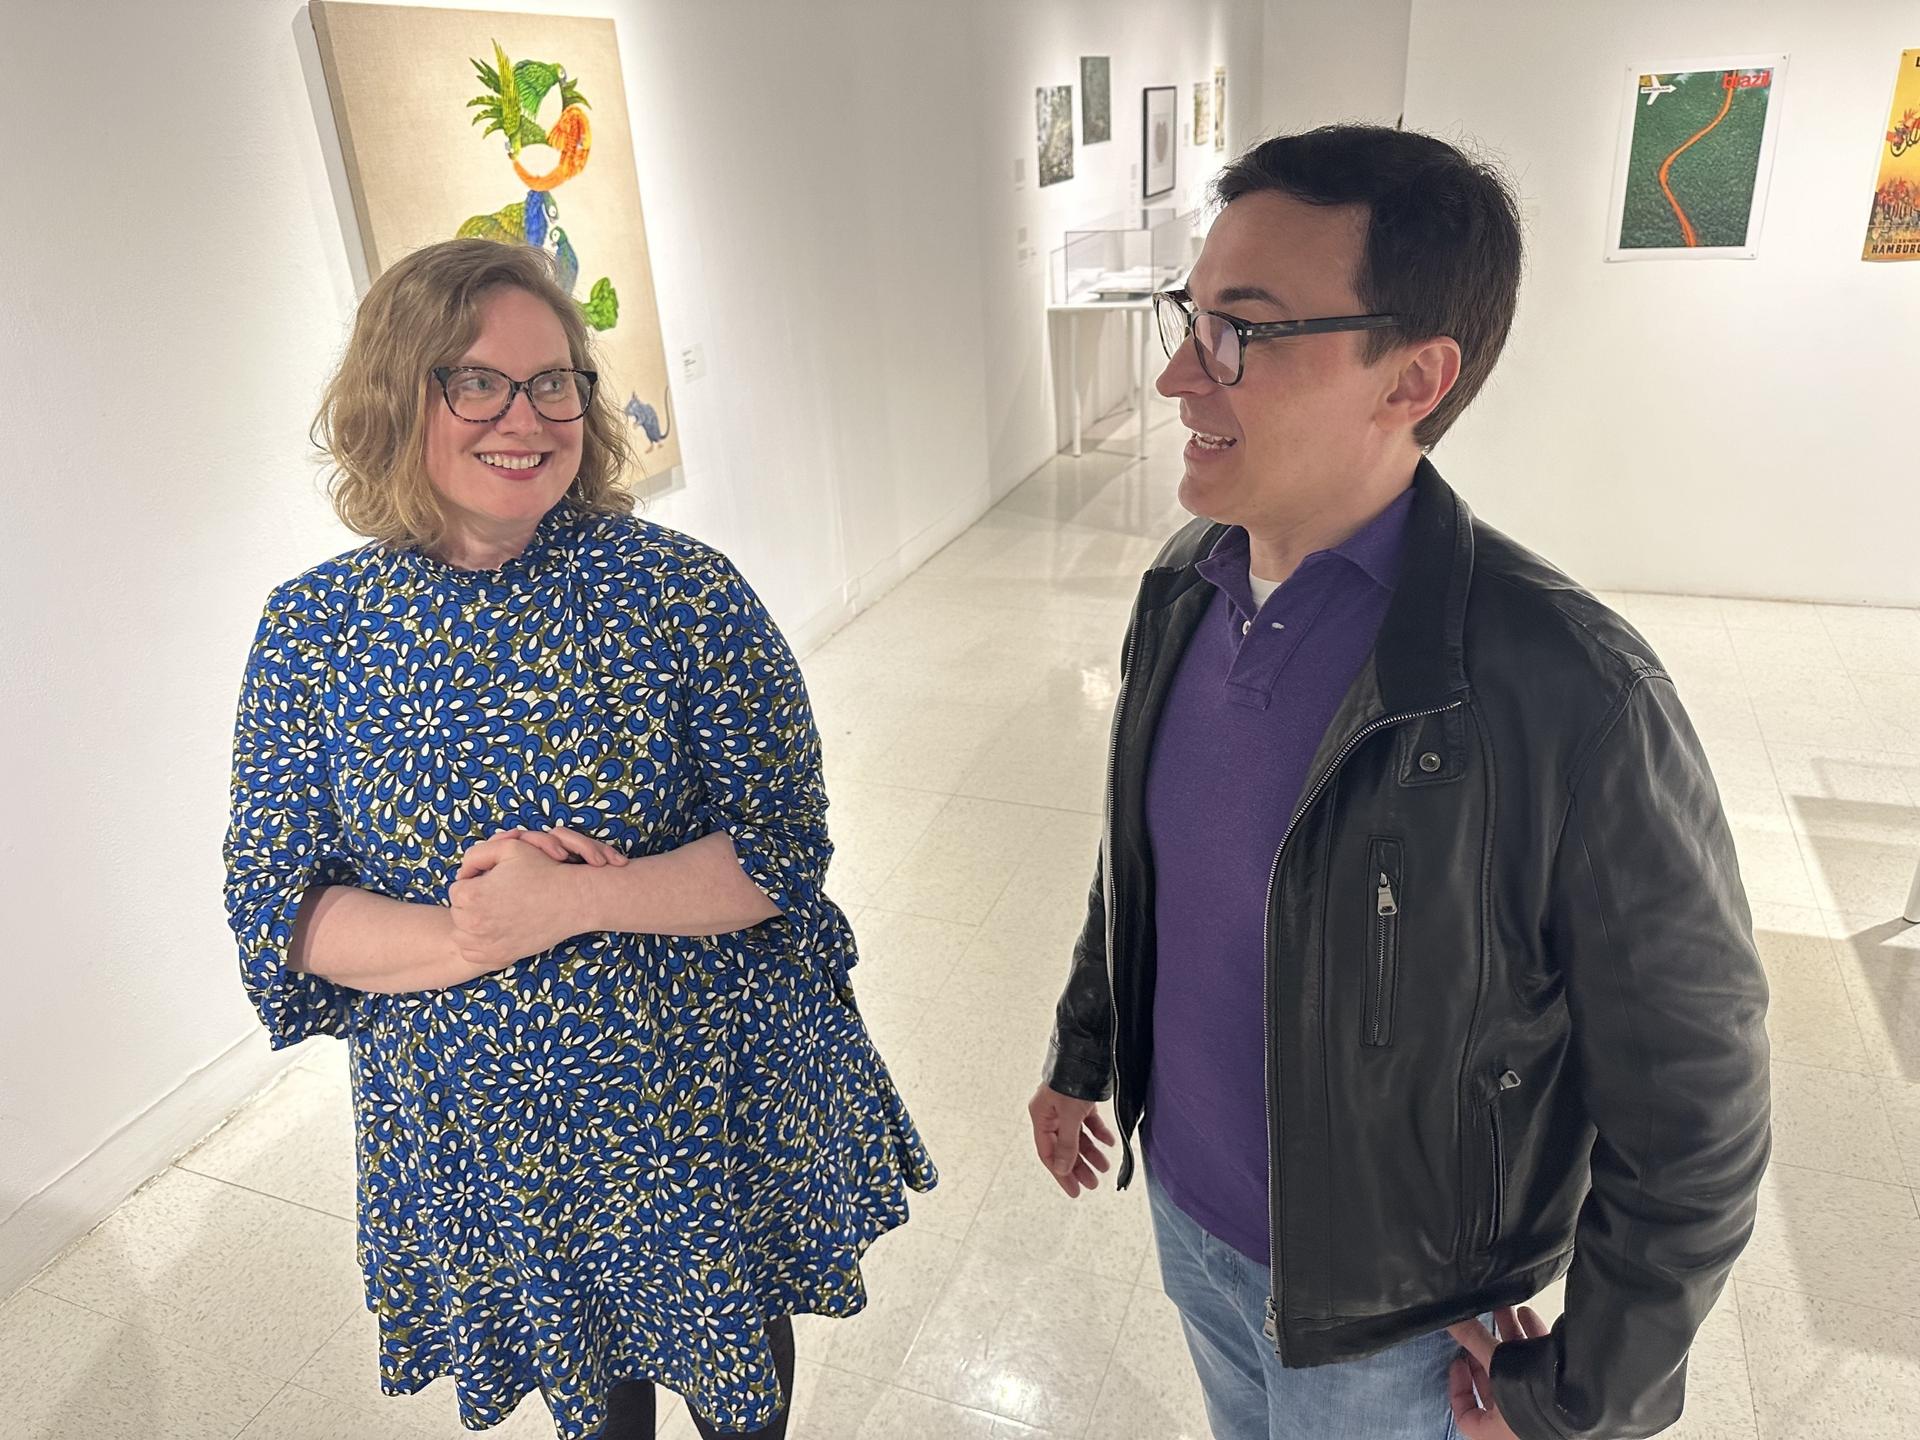 Gillian Sneed and Sergio Allevato stand together at "Imaginary Amazon," an exhibition at the University Art Gallery at San Diego State University.